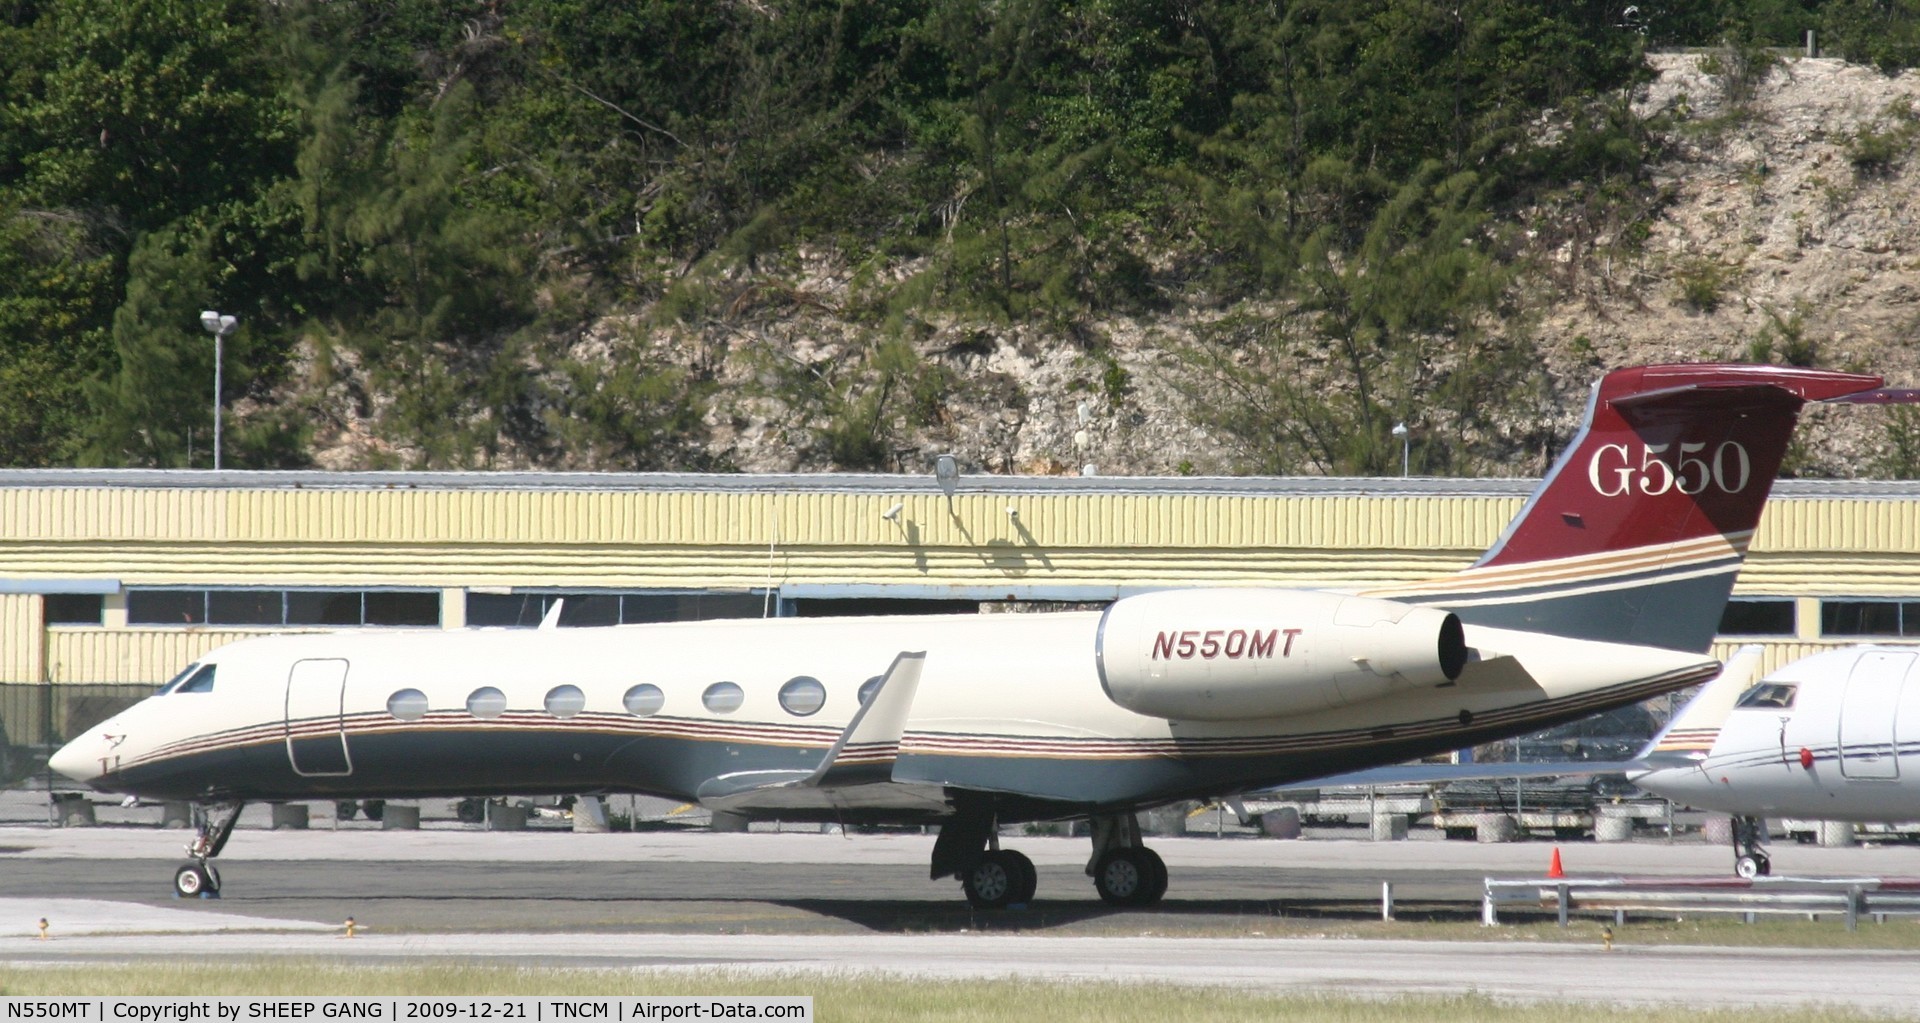 N550MT, 2003 Gulfstream Aerospace GV-SP (G550) C/N 5026, N550MT park at the Cargo ramp waiting on there next flight